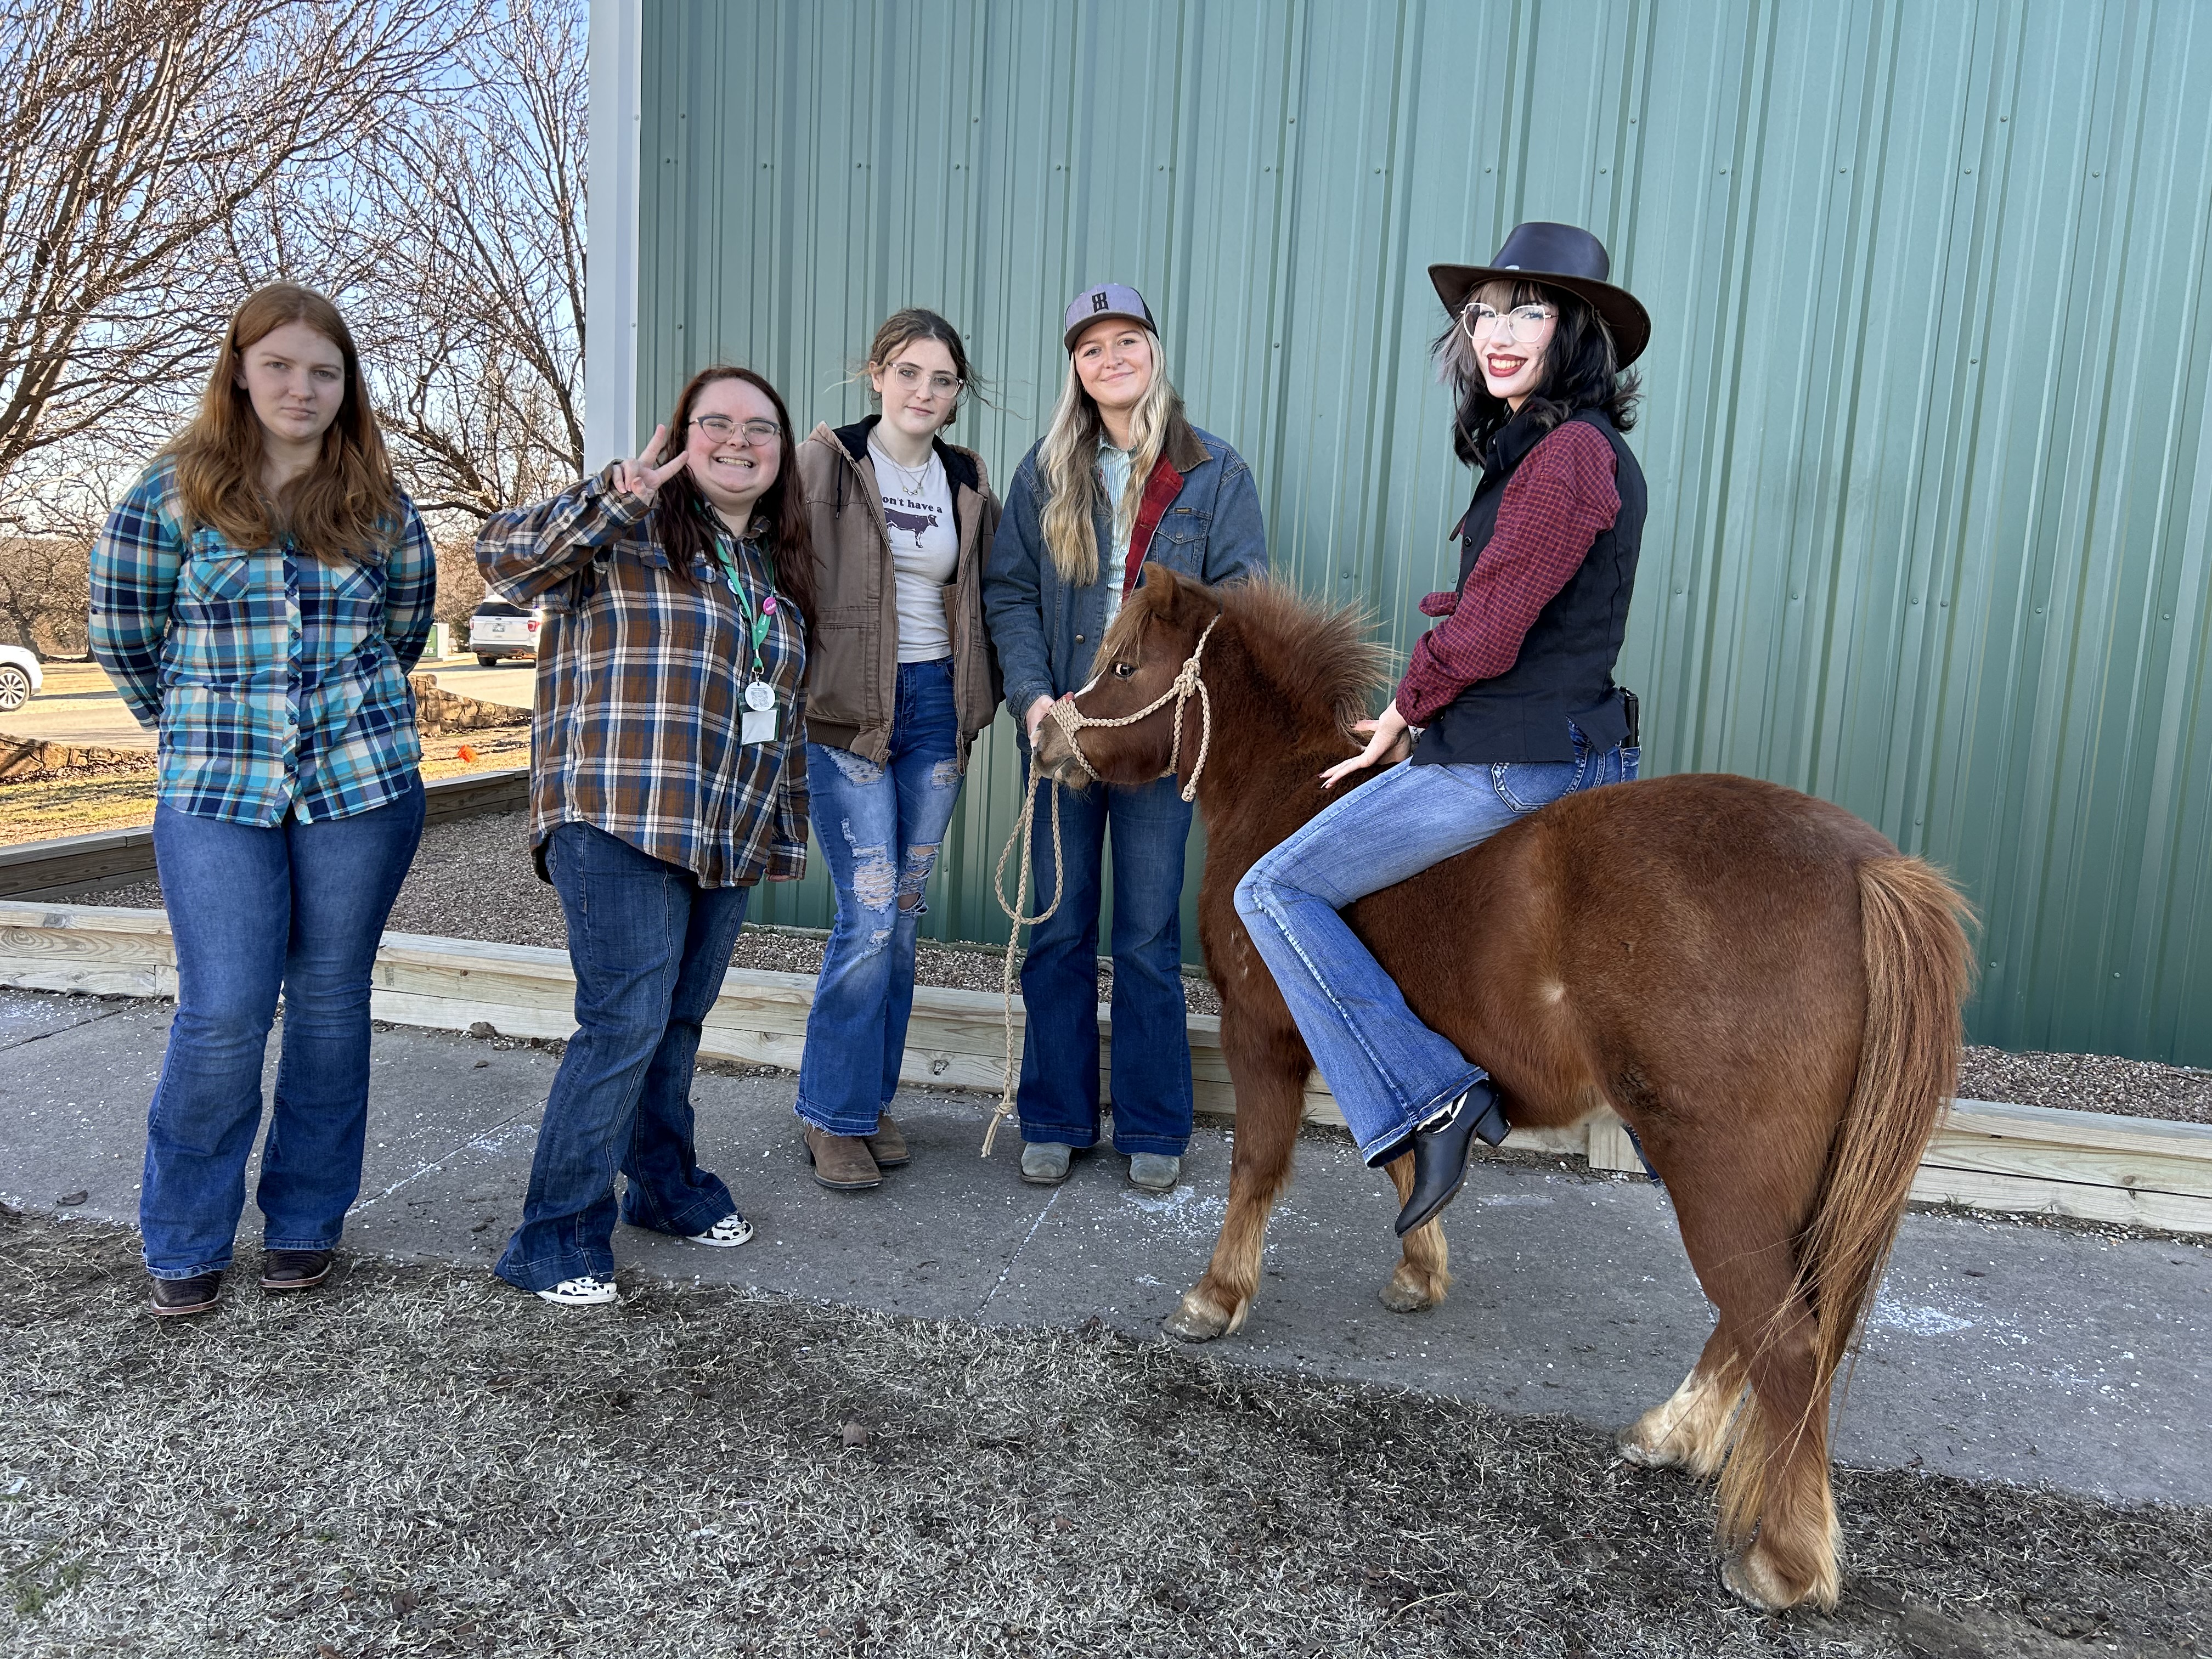 Whippet Weekly staff yeehawing their way through Western Day for Red Ribbon Week. Pictured from left to right Emma Bruce, Hanna Smith, Maddyson Marson-Compton, Montana Goad, Shooter Montana's pony, and Jadelan Cartwright